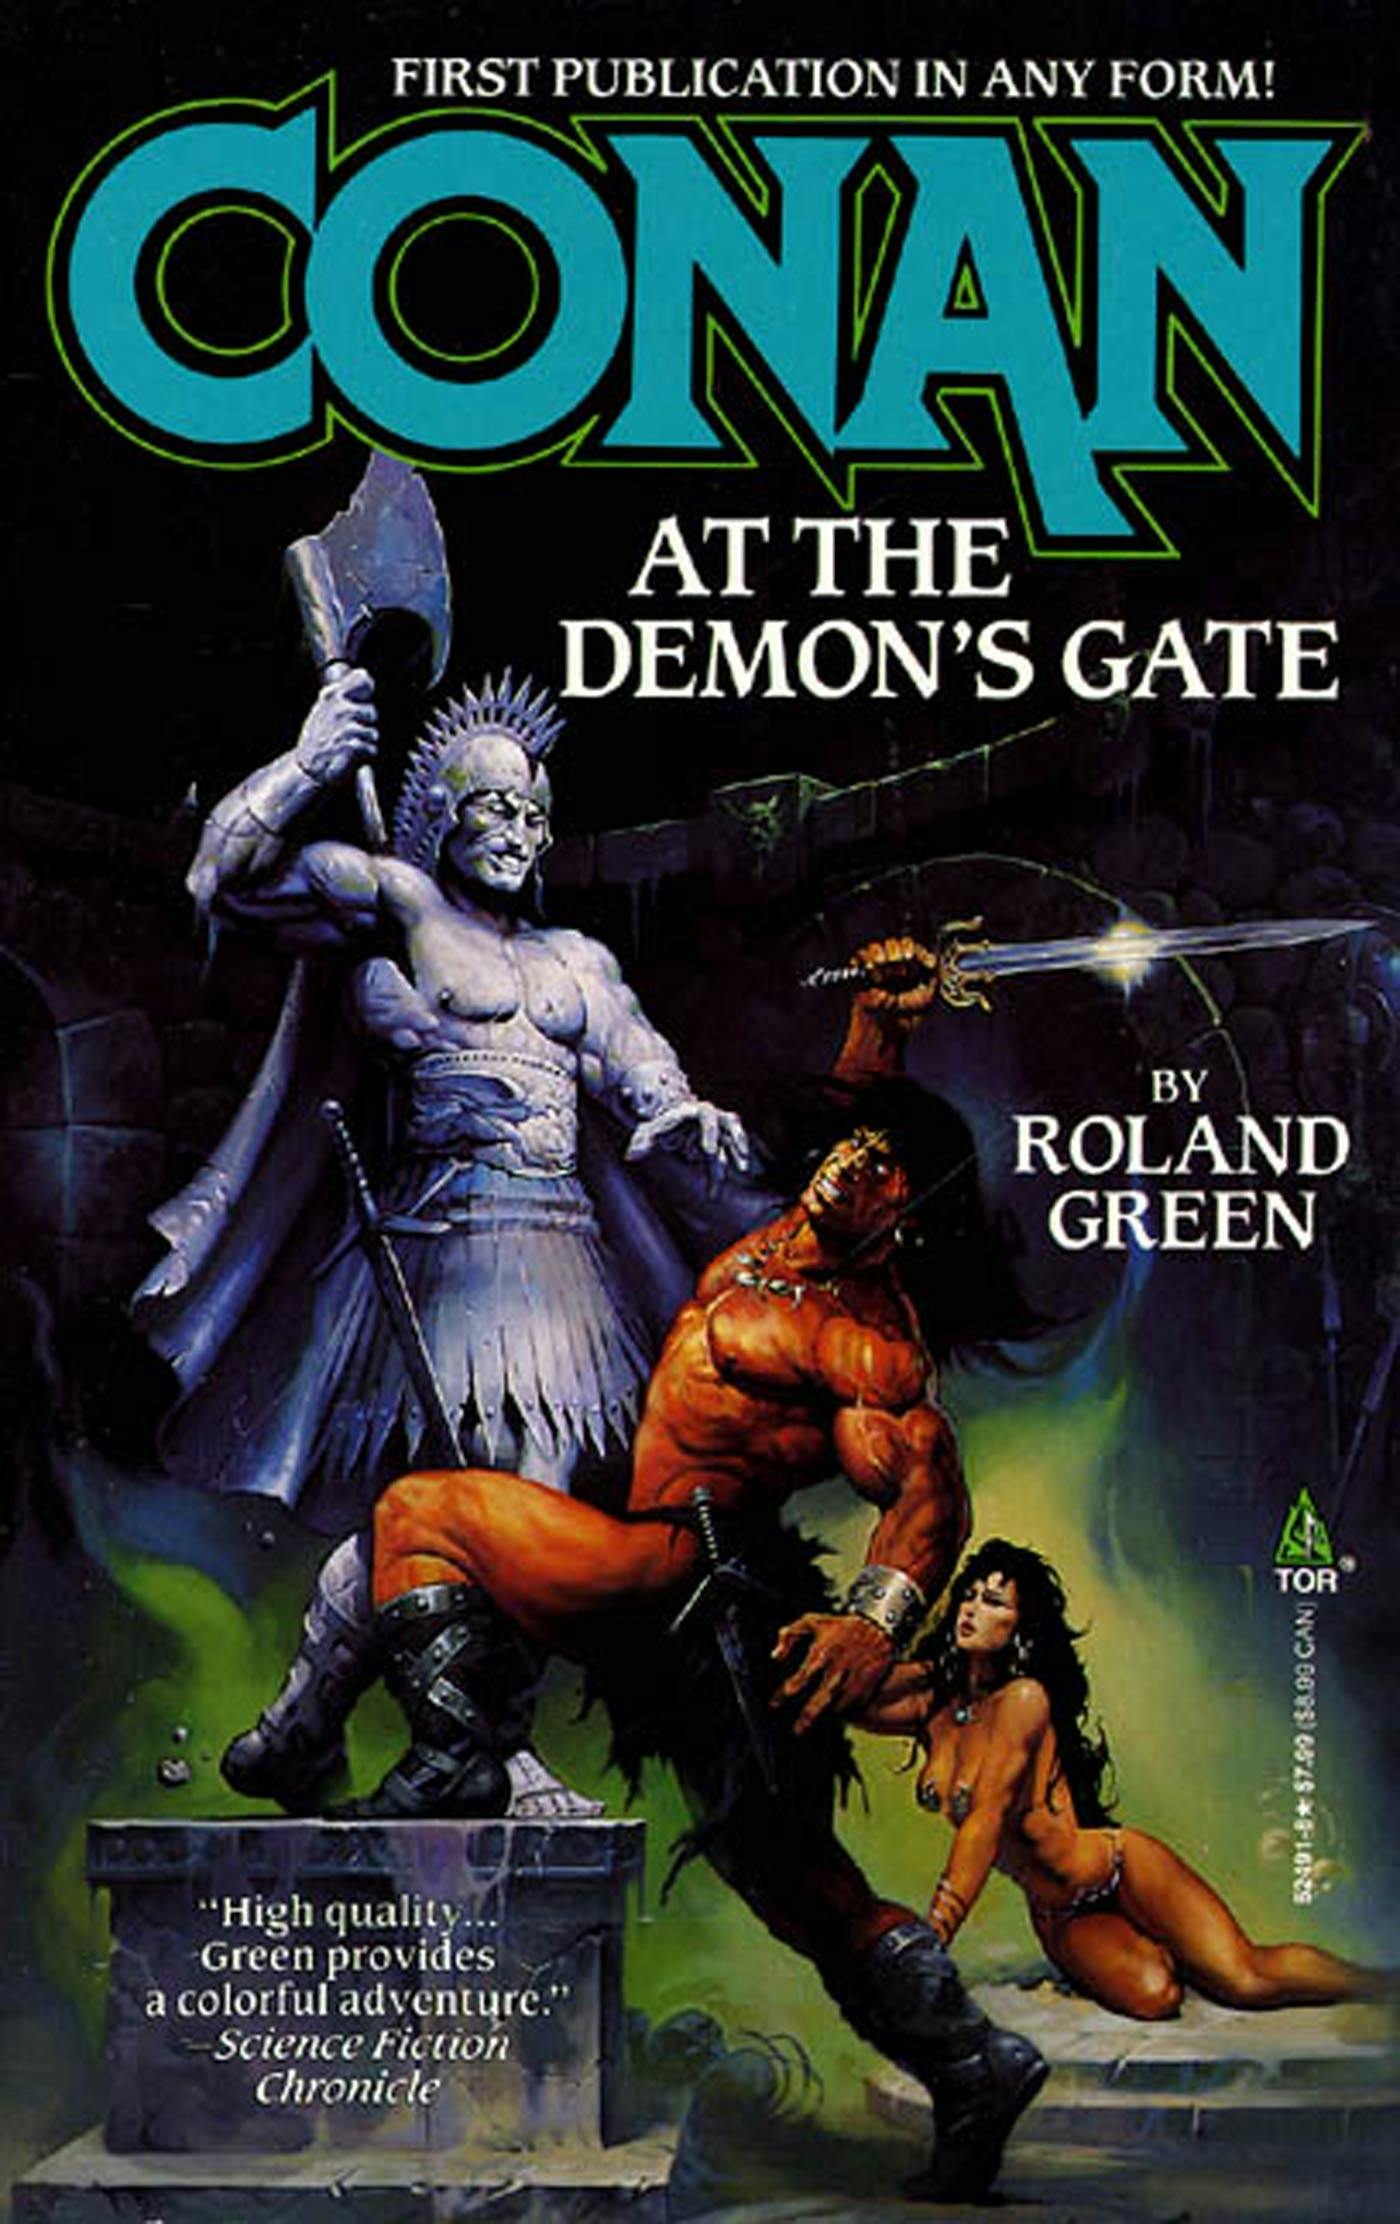 Cover for the book titled as: Conan at the Demon's Gate